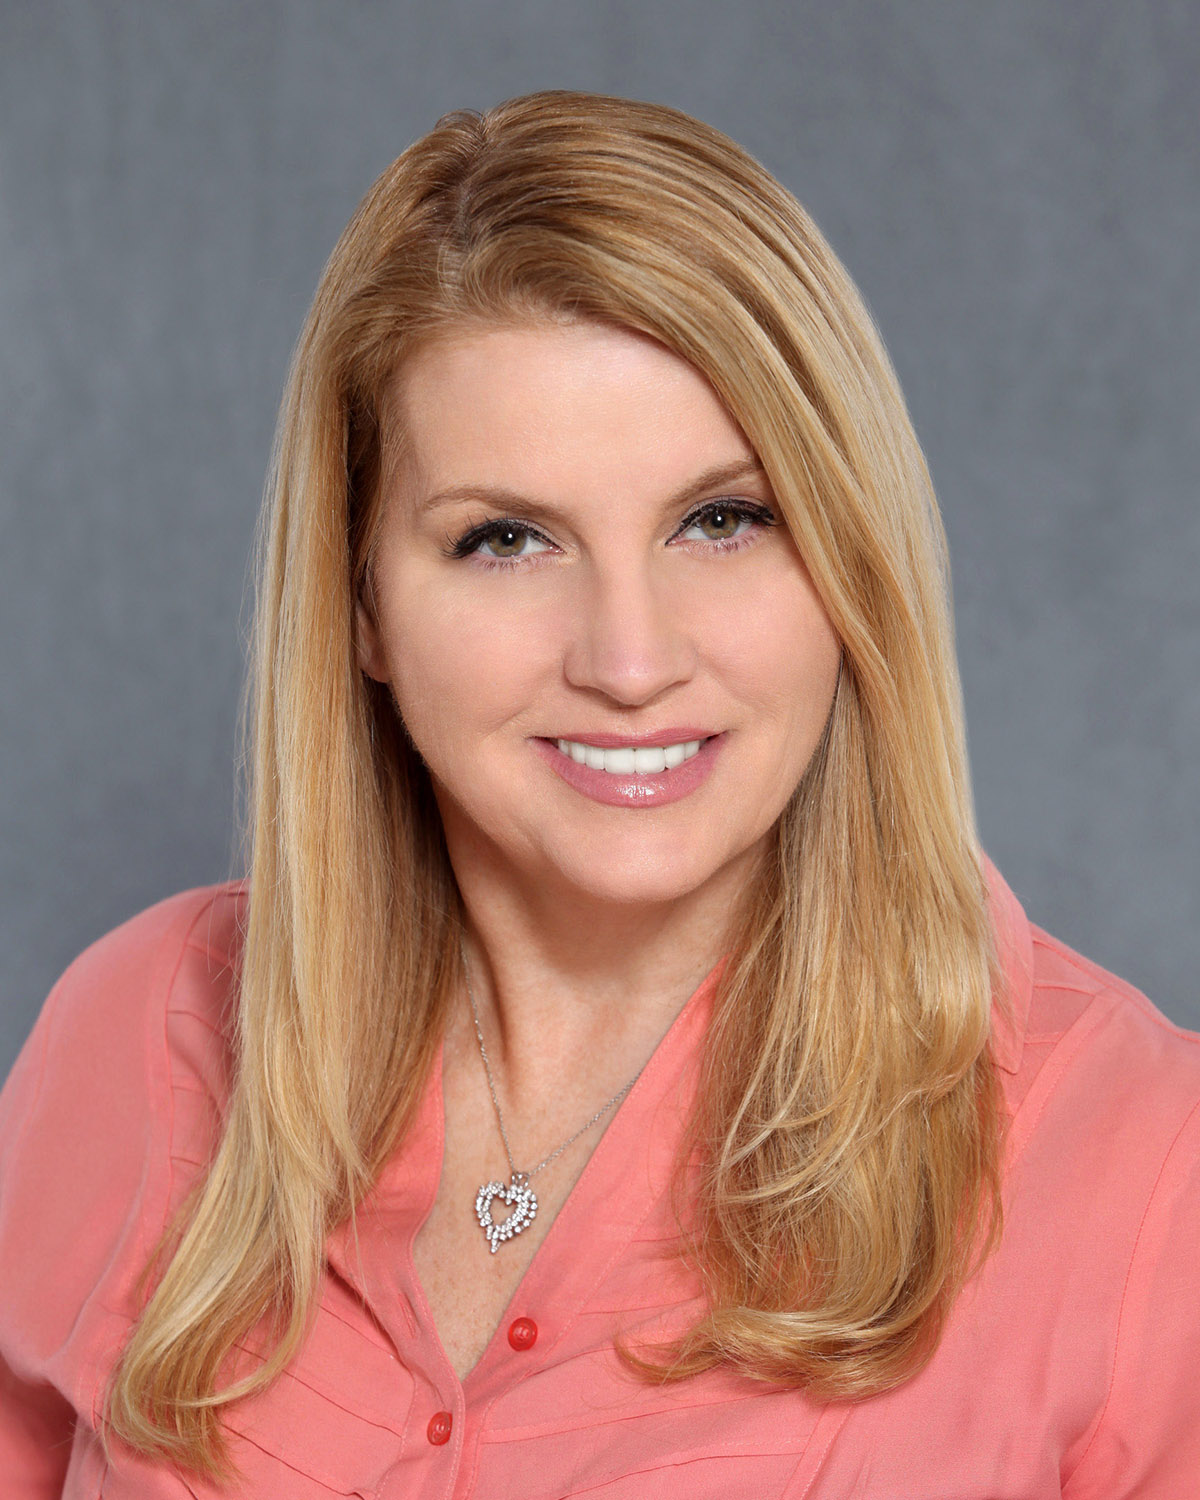 Hackensack Meridian Raritan Bay Medical Center Foundation is pleased to announce the addition of Laura Bianchini to the Raritan Bay Medical Center Foundation Board of Trustees.